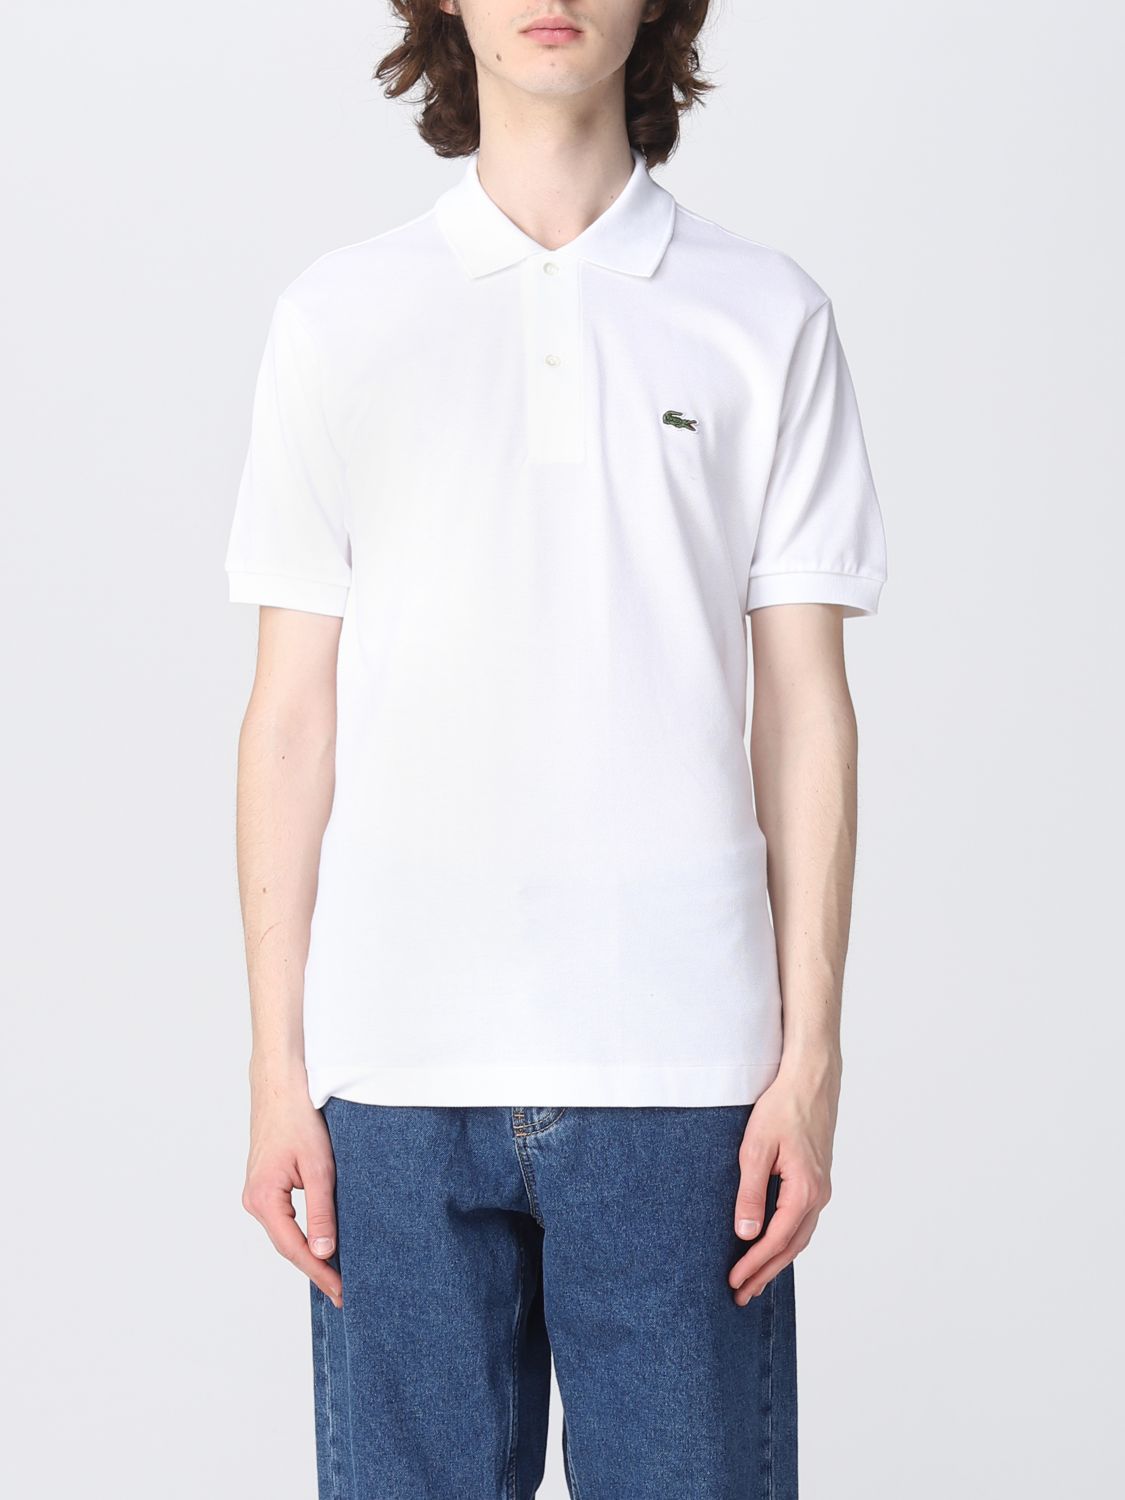 LACOSTE: polo for man - White | Lacoste polo shirt online on GIGLIO.COM